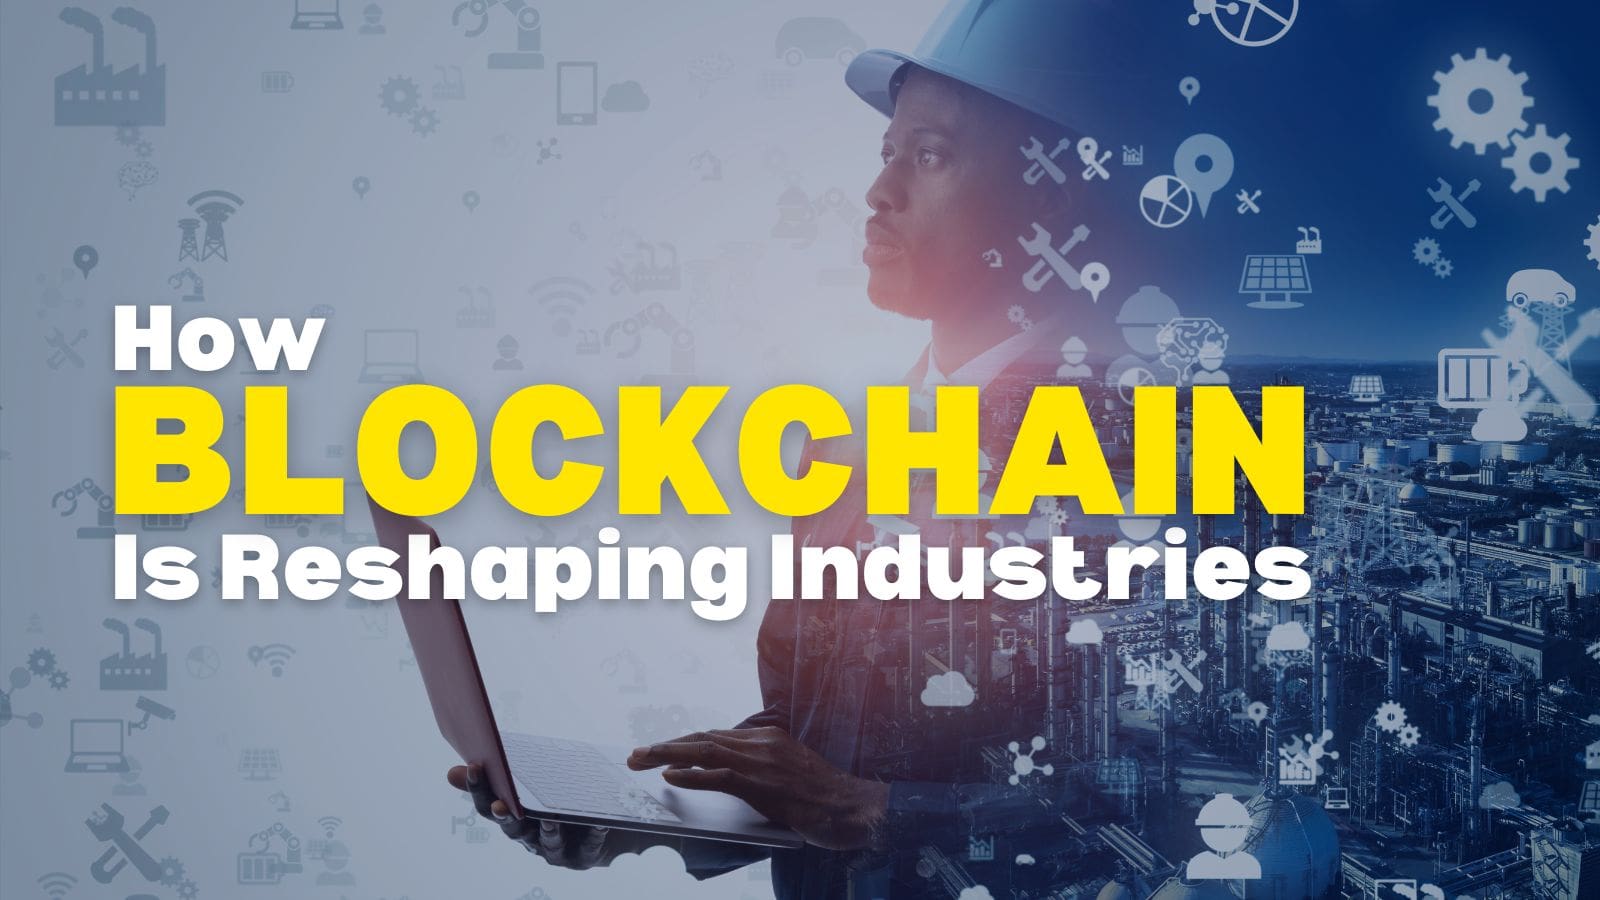 How Blockchain is Reshaping Industries